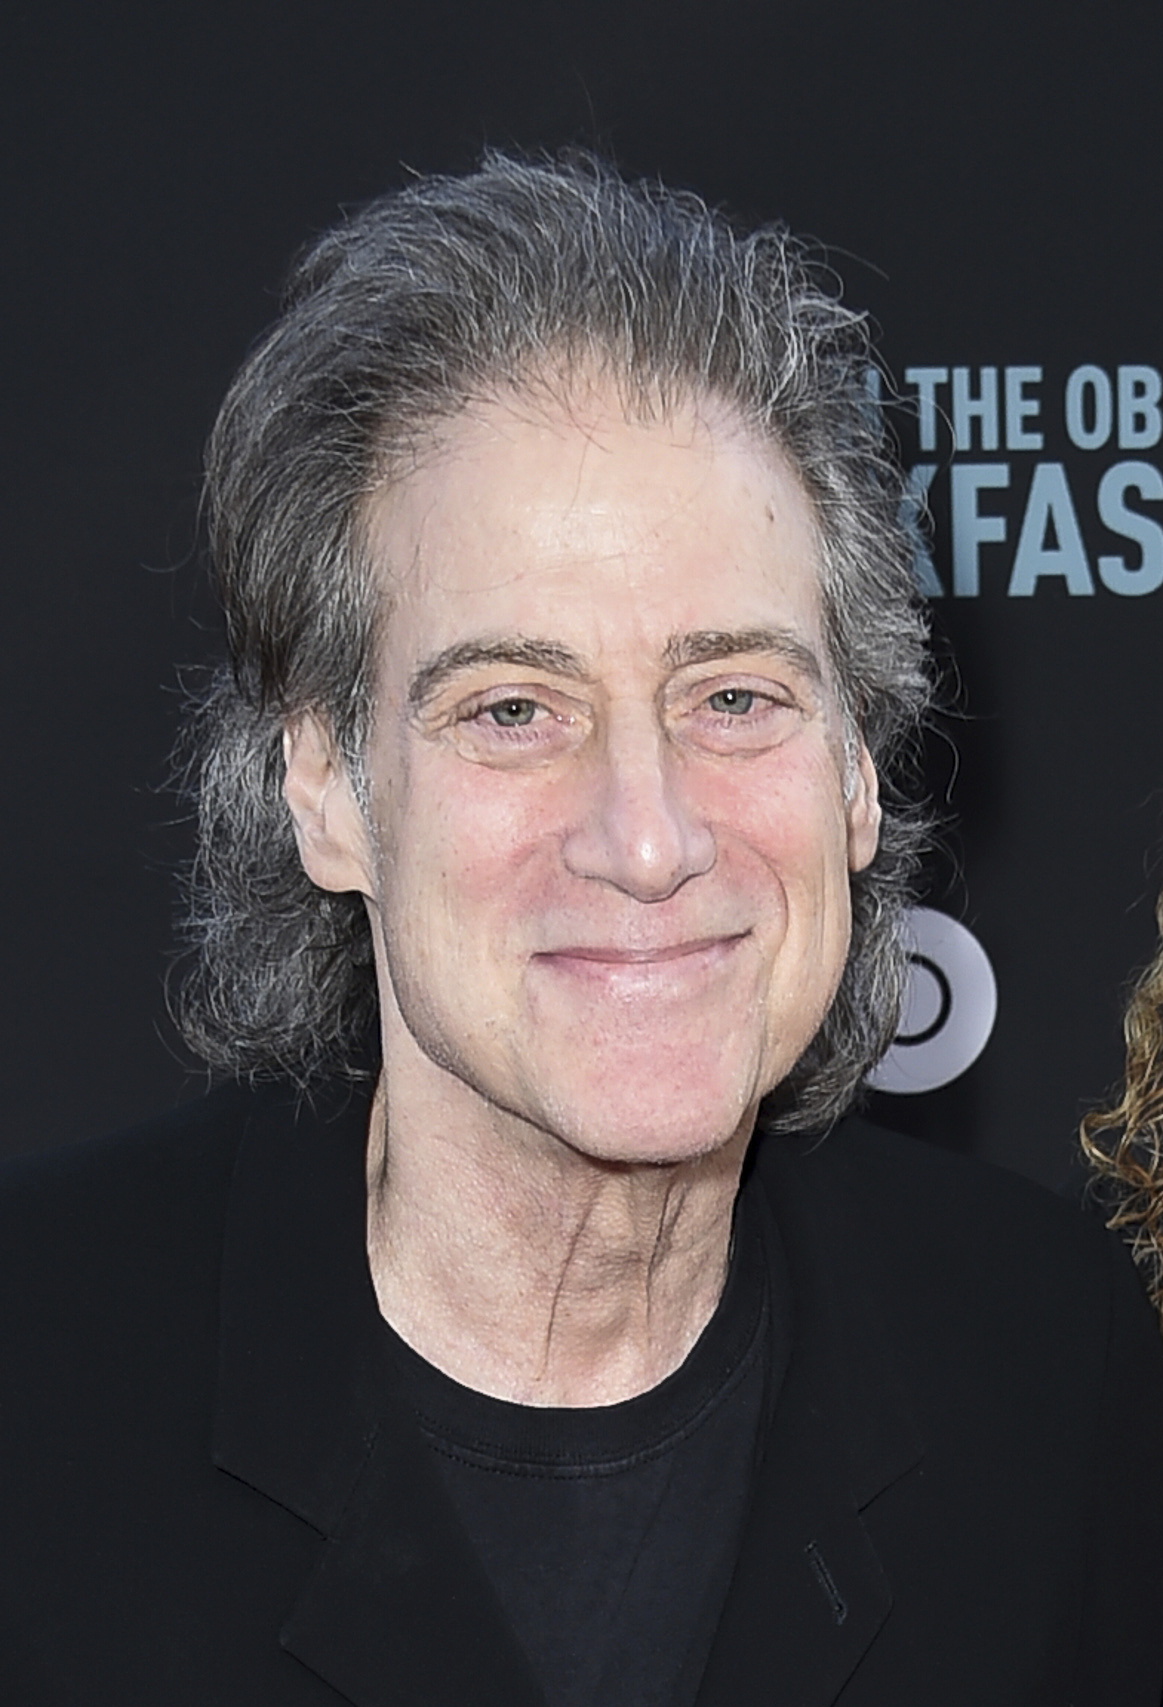 FILE - Richard Lewis appears at the premiere of "If You're Not In The Obit, Eat Breakfast" in Beverly Hills, Calif., on May 17, 2017. Lewis, an acclaimed comedian known for exploring his neuroses in frantic, stream-of-consciousness diatribes while dressed in all-black, leading to his nickname “The Prince of Pain,” has died. He was 76. He died at his home in Los Angeles on Tuesday night after suffering a heart attack, according to his publicist Jeff Abraham. (Photo by Richard Shotwell/Invision/AP, File)